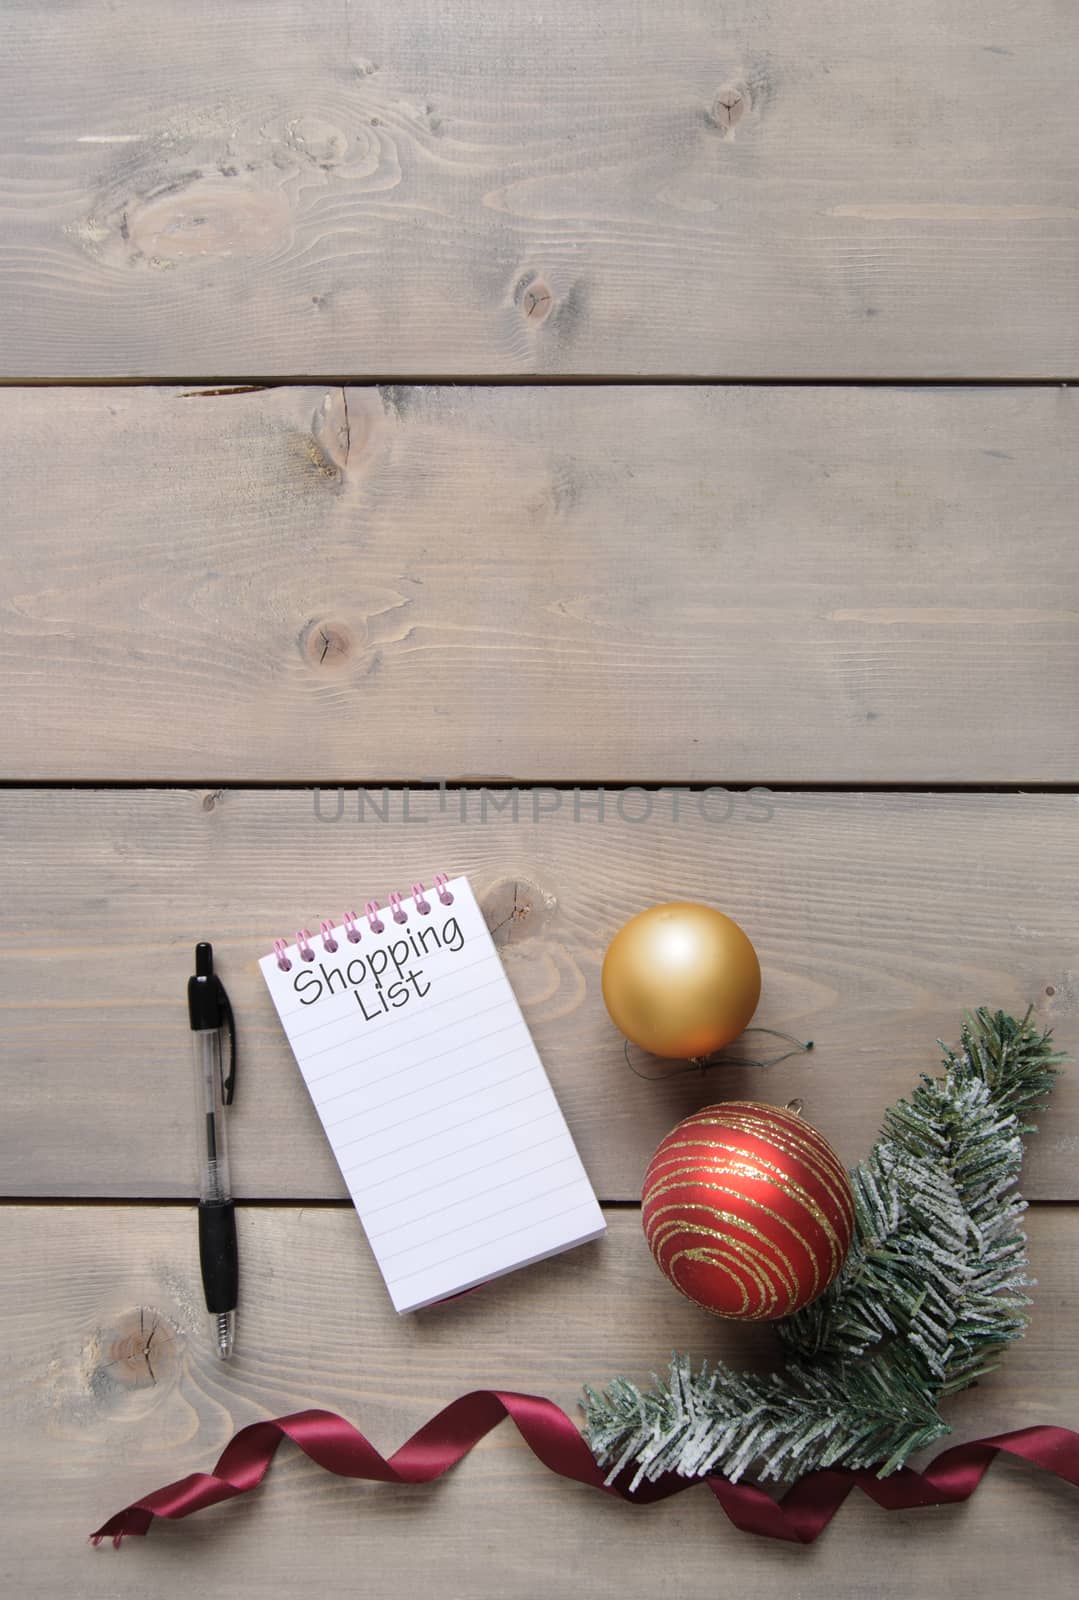 Notepad with Christmas shopping list over a wooden background